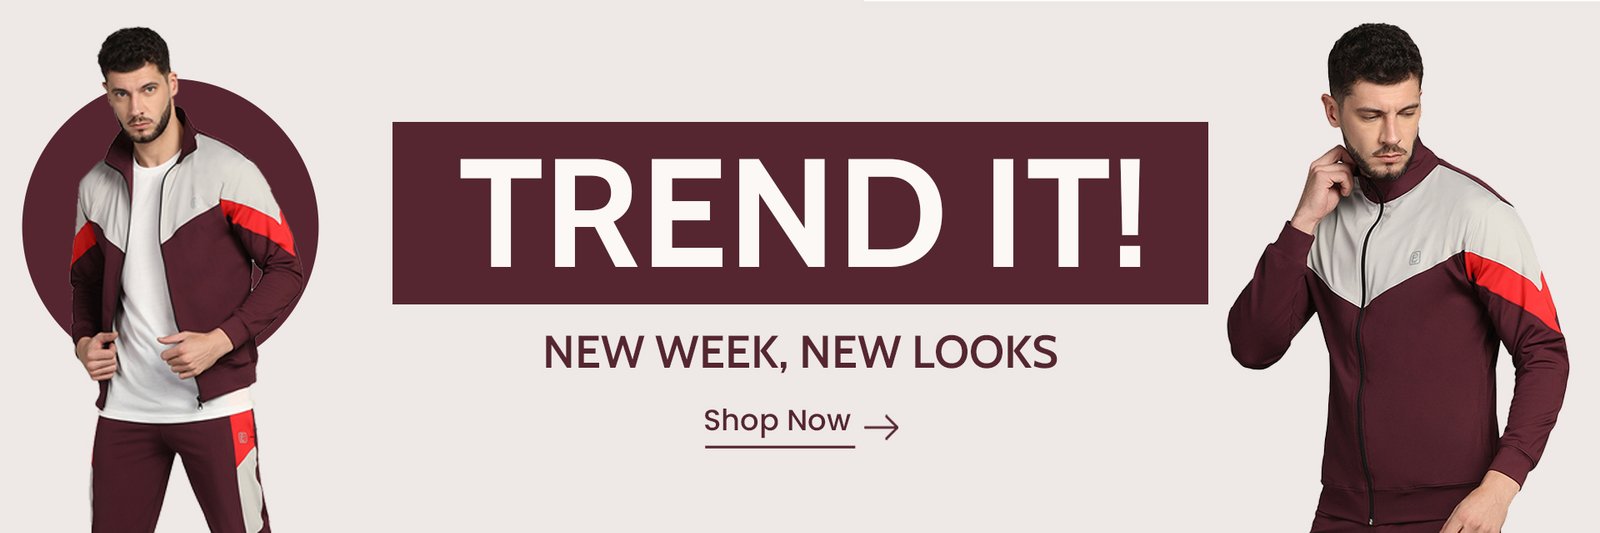 trend it updated banner praume